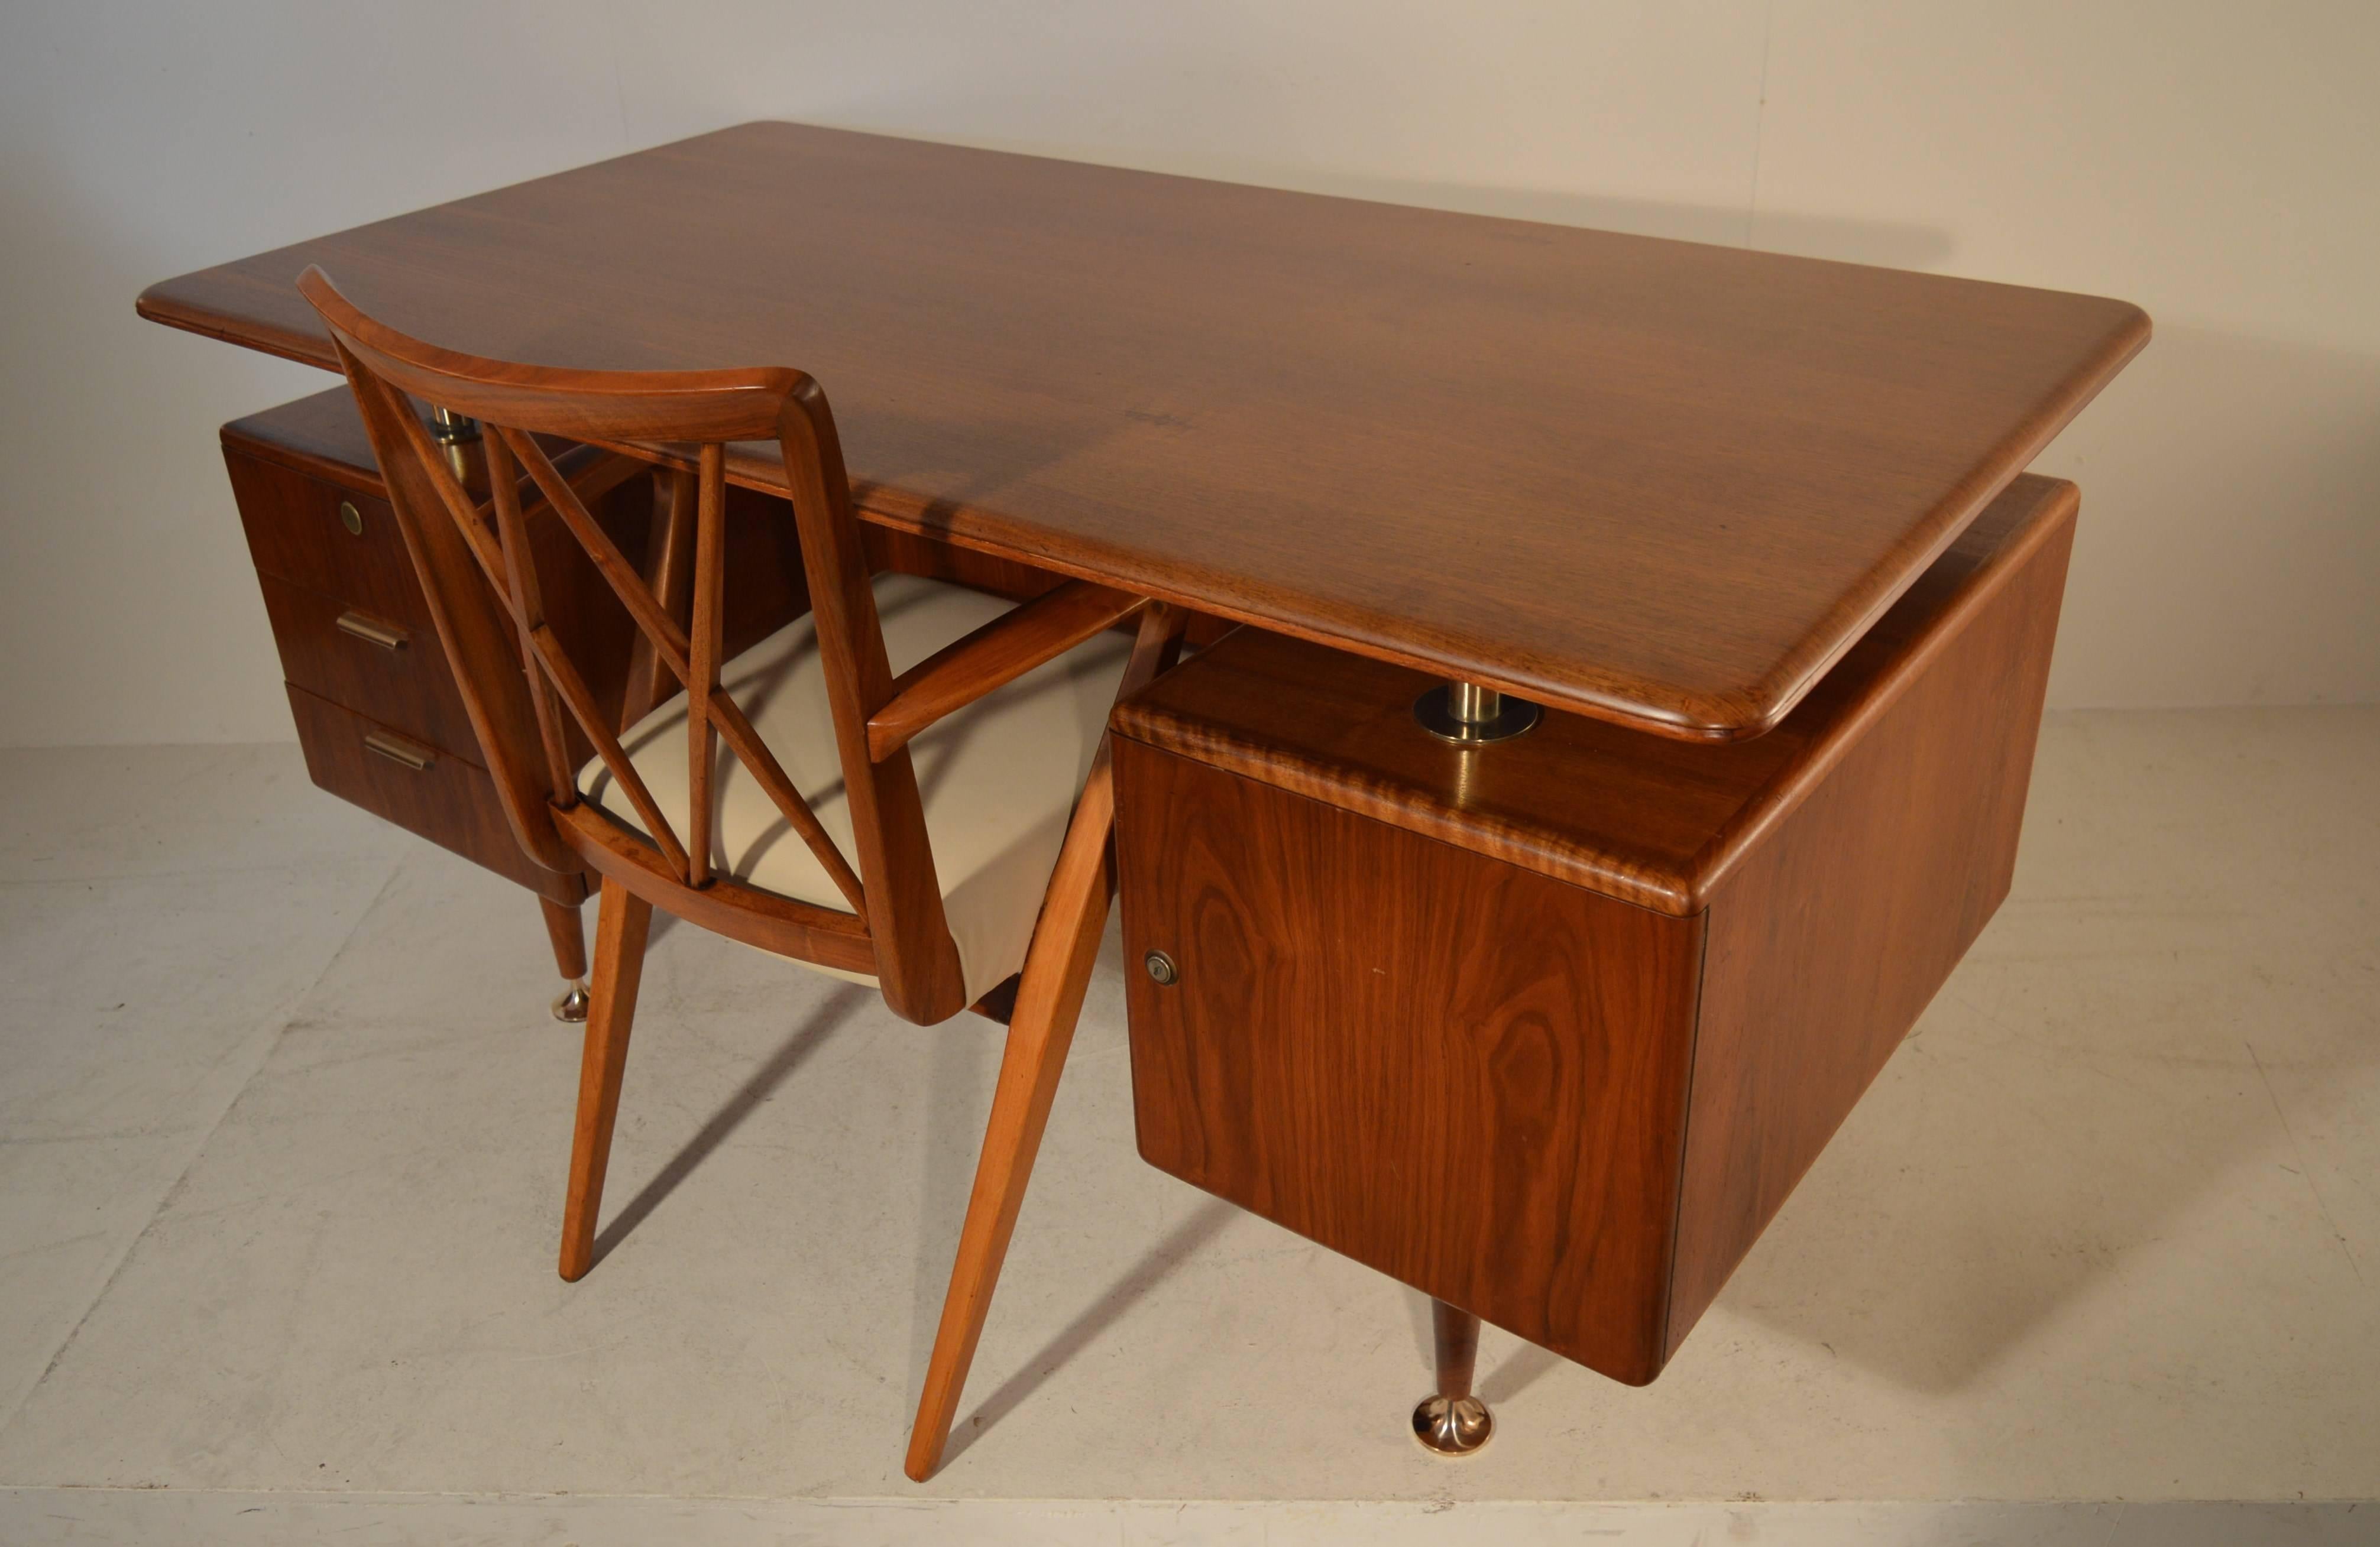 Modernist desk in walnut from the Poly Z-series by the Dutch designer Abraham Patijn. The original chair is reupholstered in cream-leather.
Both chair and desk are in a very good condition.